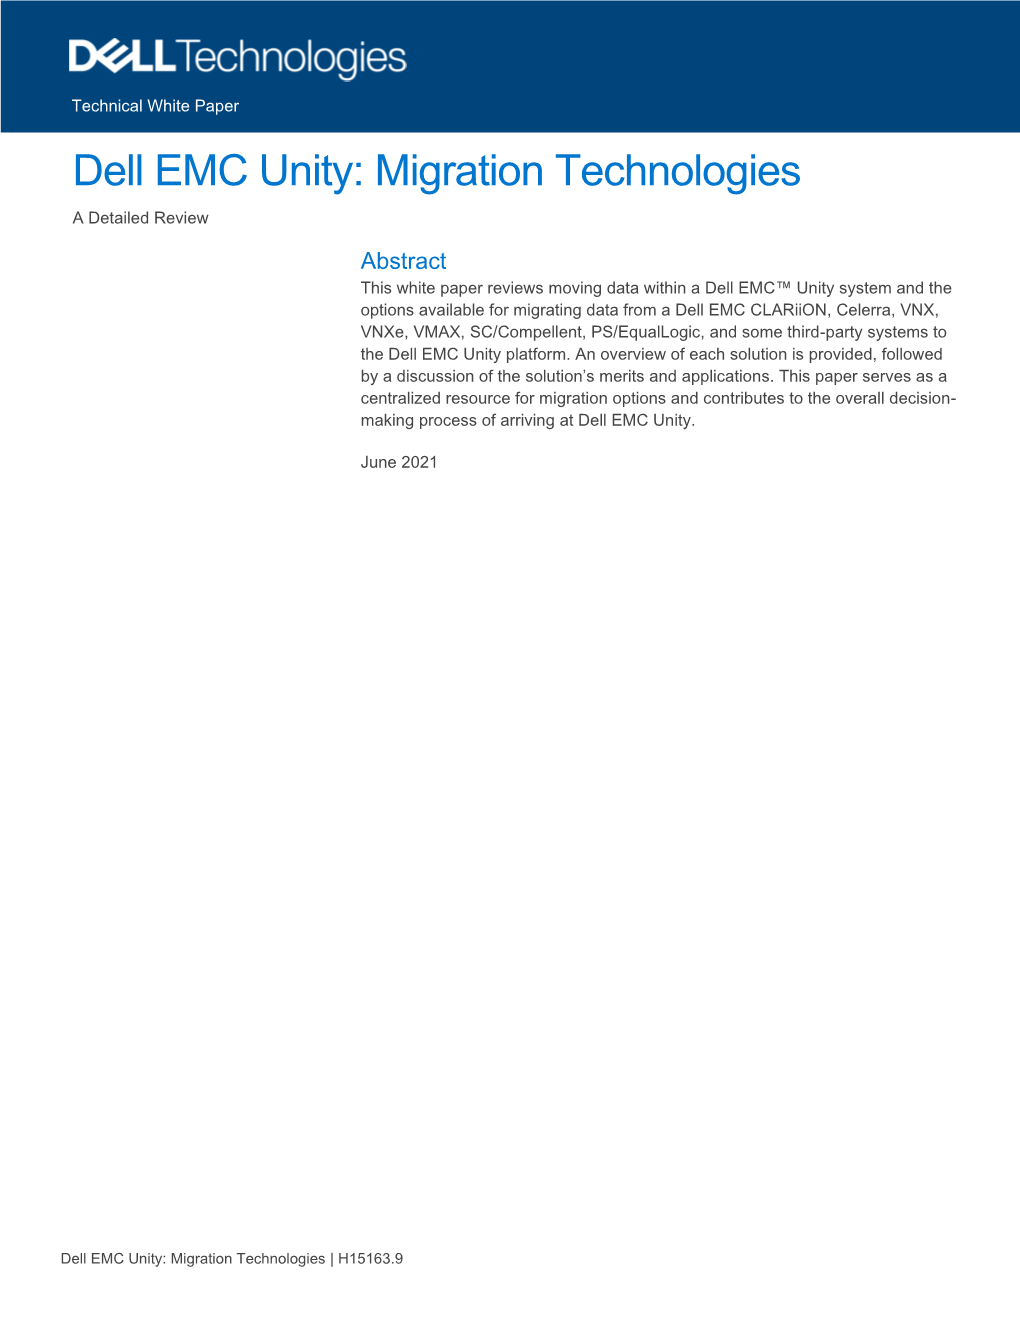 Dell EMC Unity: Migration Technologies a Detailed Review